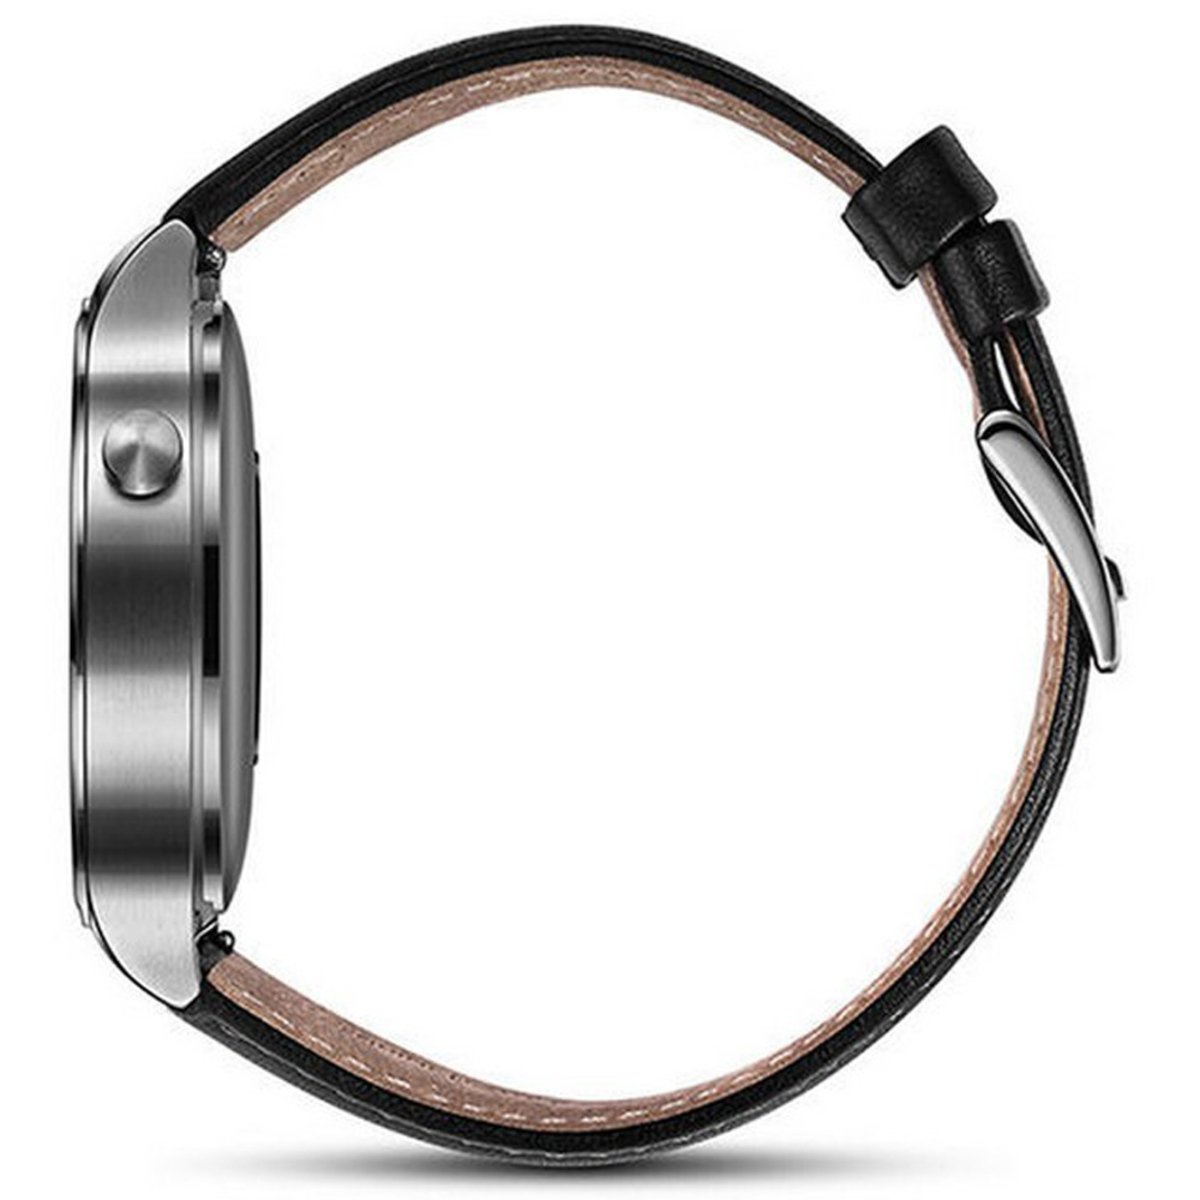 Huawei Smart Watch with Black Leather Strap